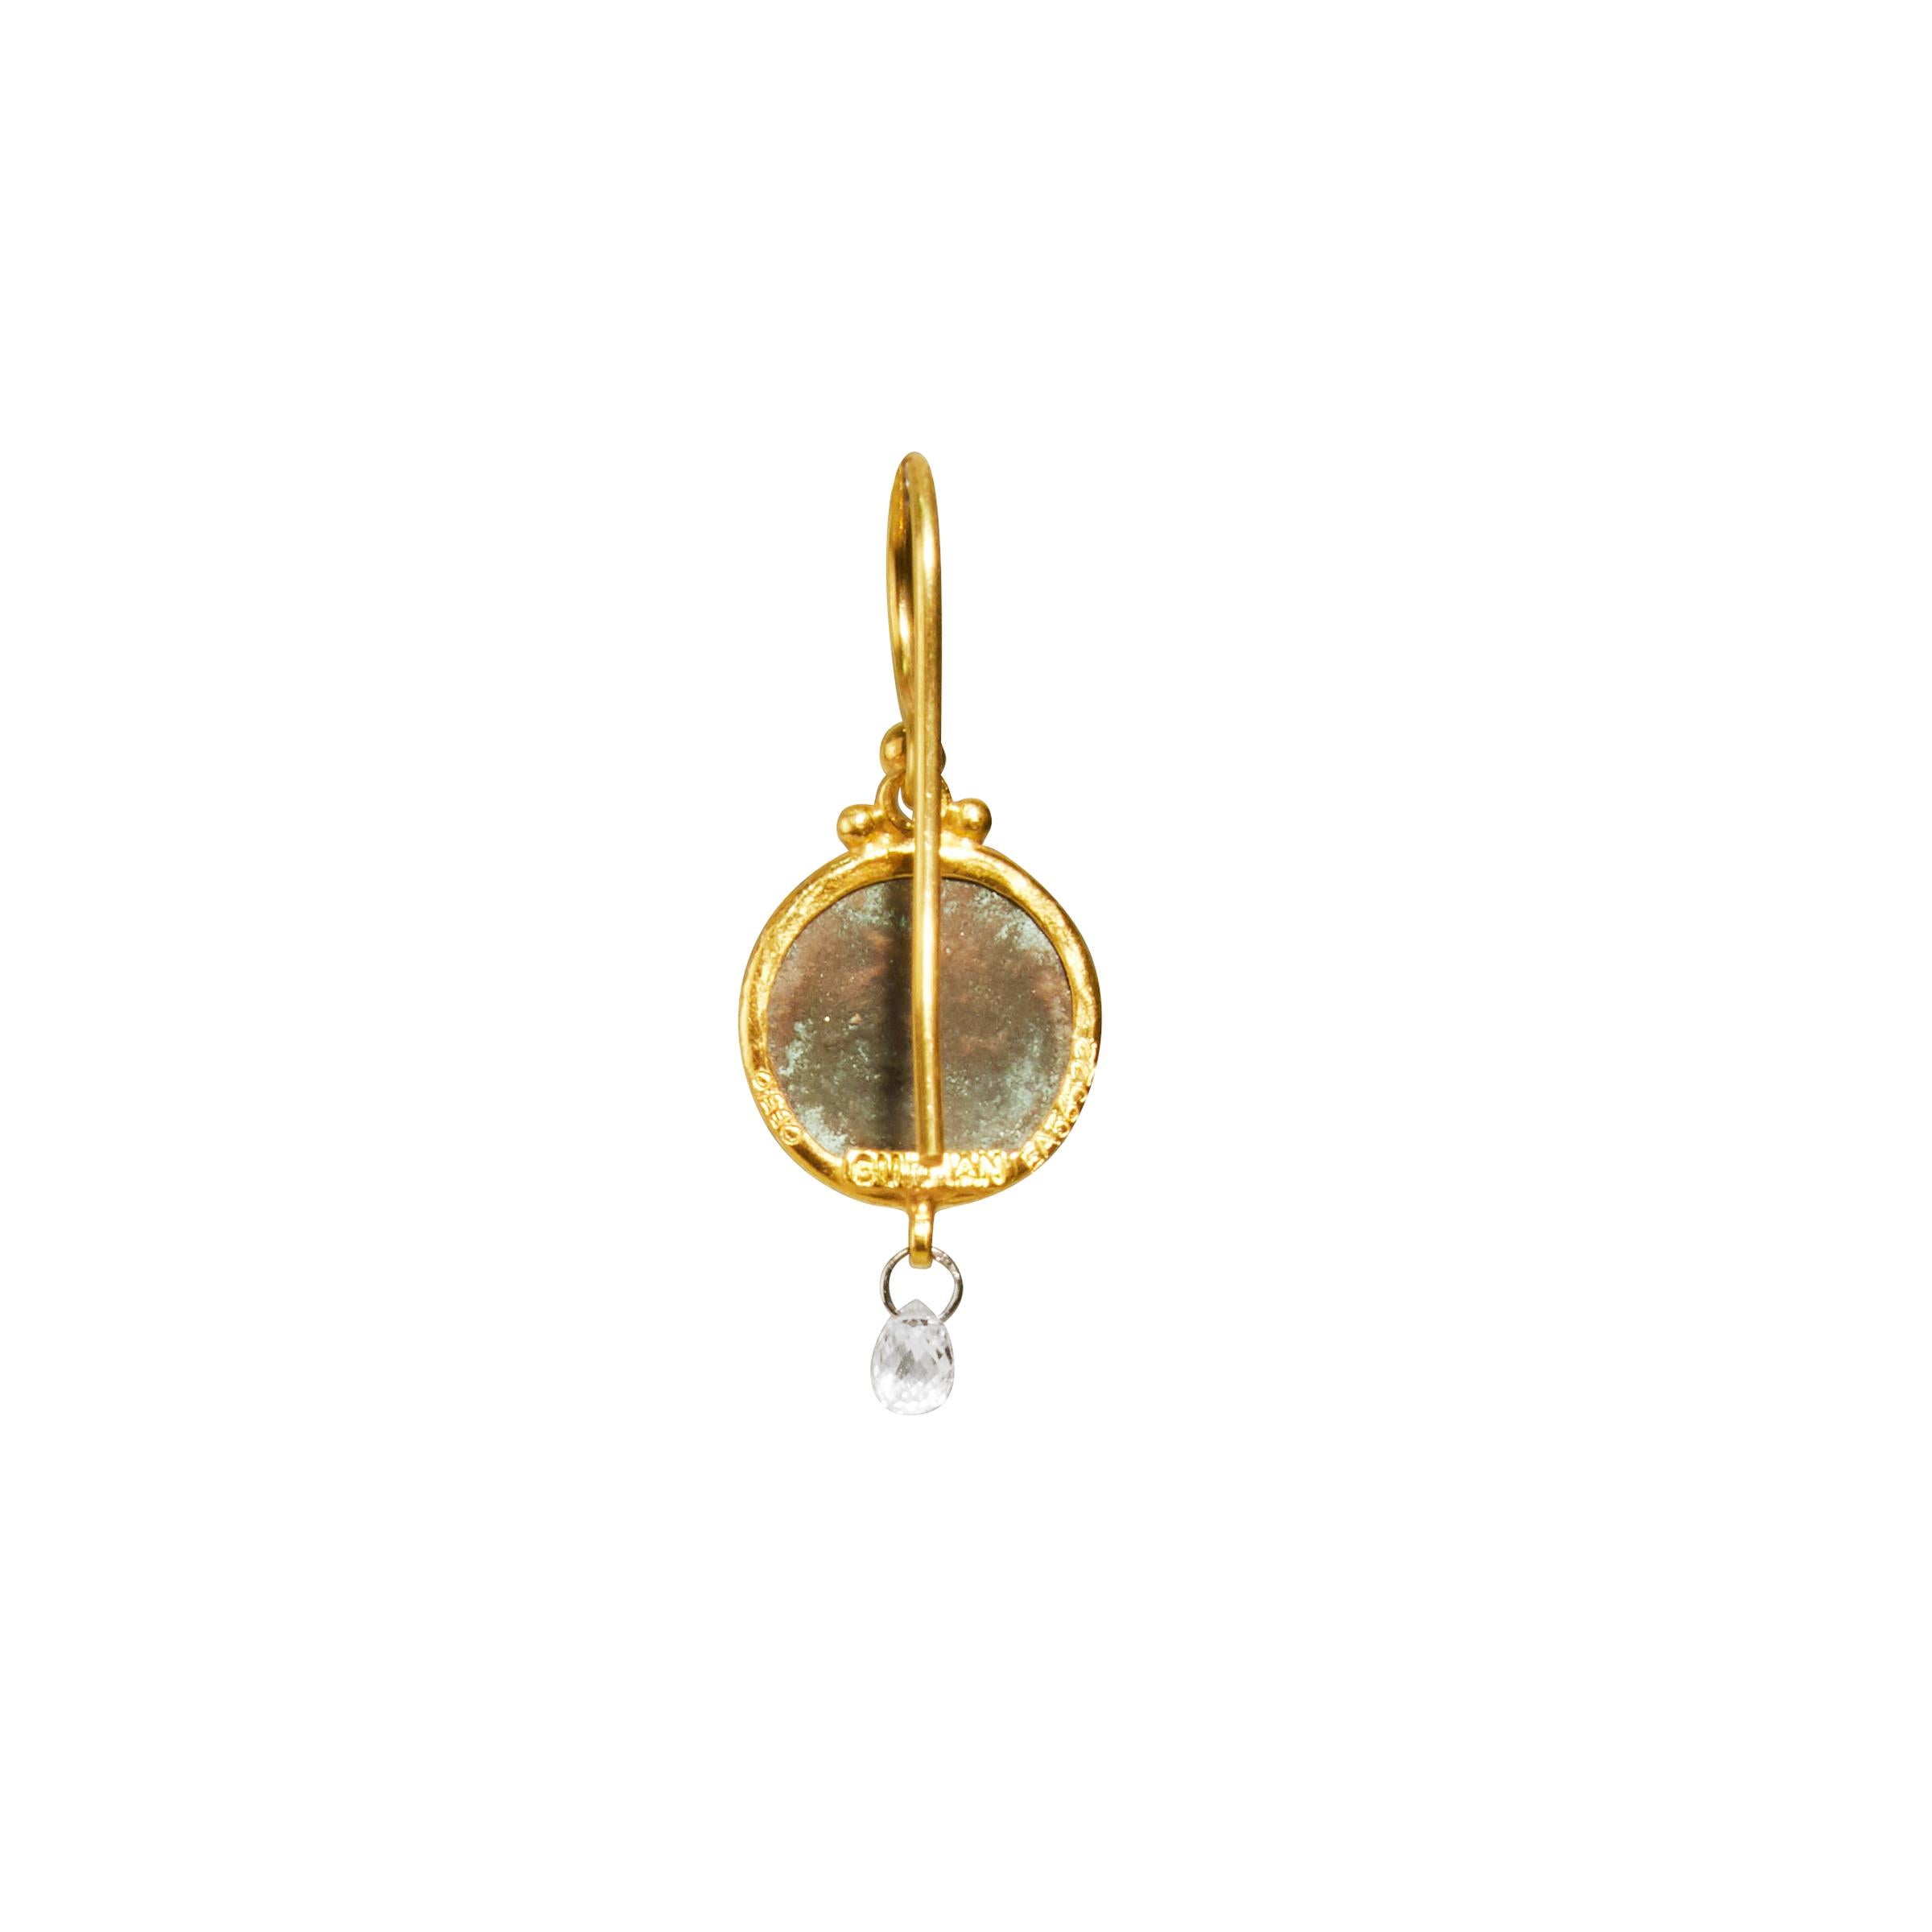 Contemporary Gurhan 24 Karat Hammered Yellow Gold Roman Coin and Diamond Brio Drop Earrings For Sale